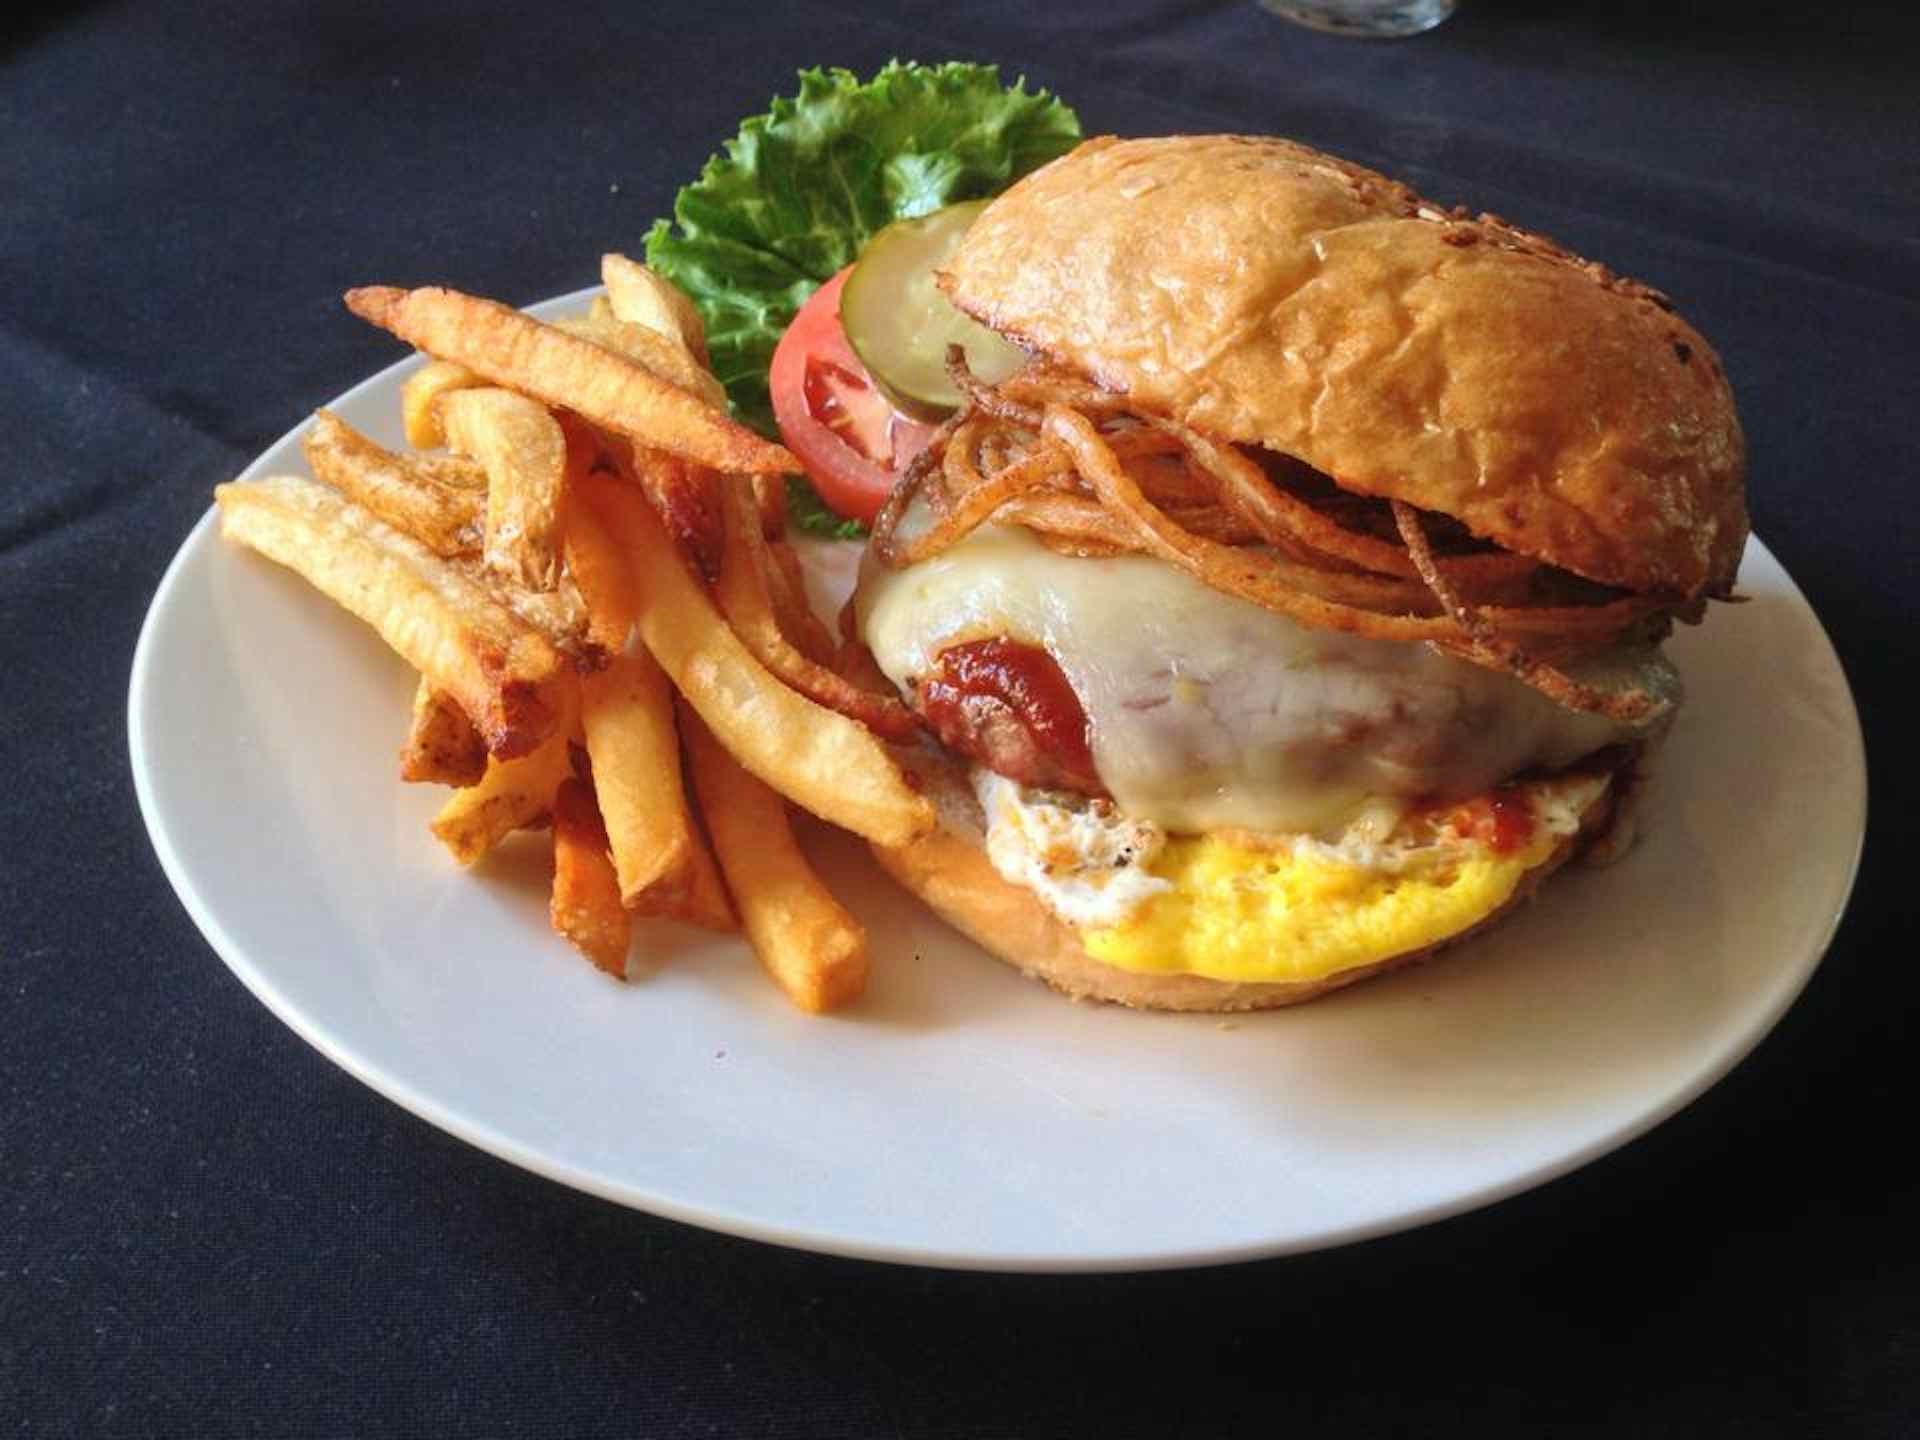 Burger with crispy onions and fresh fries, courtesy of the Snake River Roadhouse of the Yellowstone Teton Territory in Idaho